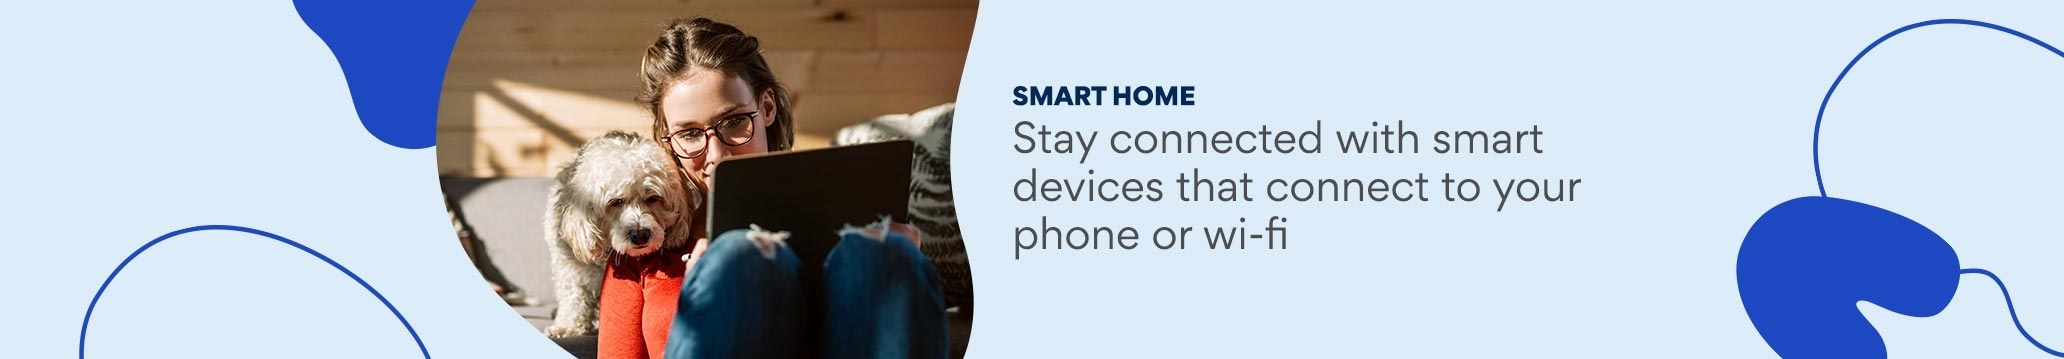 Smart Home. Stay connected with smart devices that connect to your phone or wi-fi.